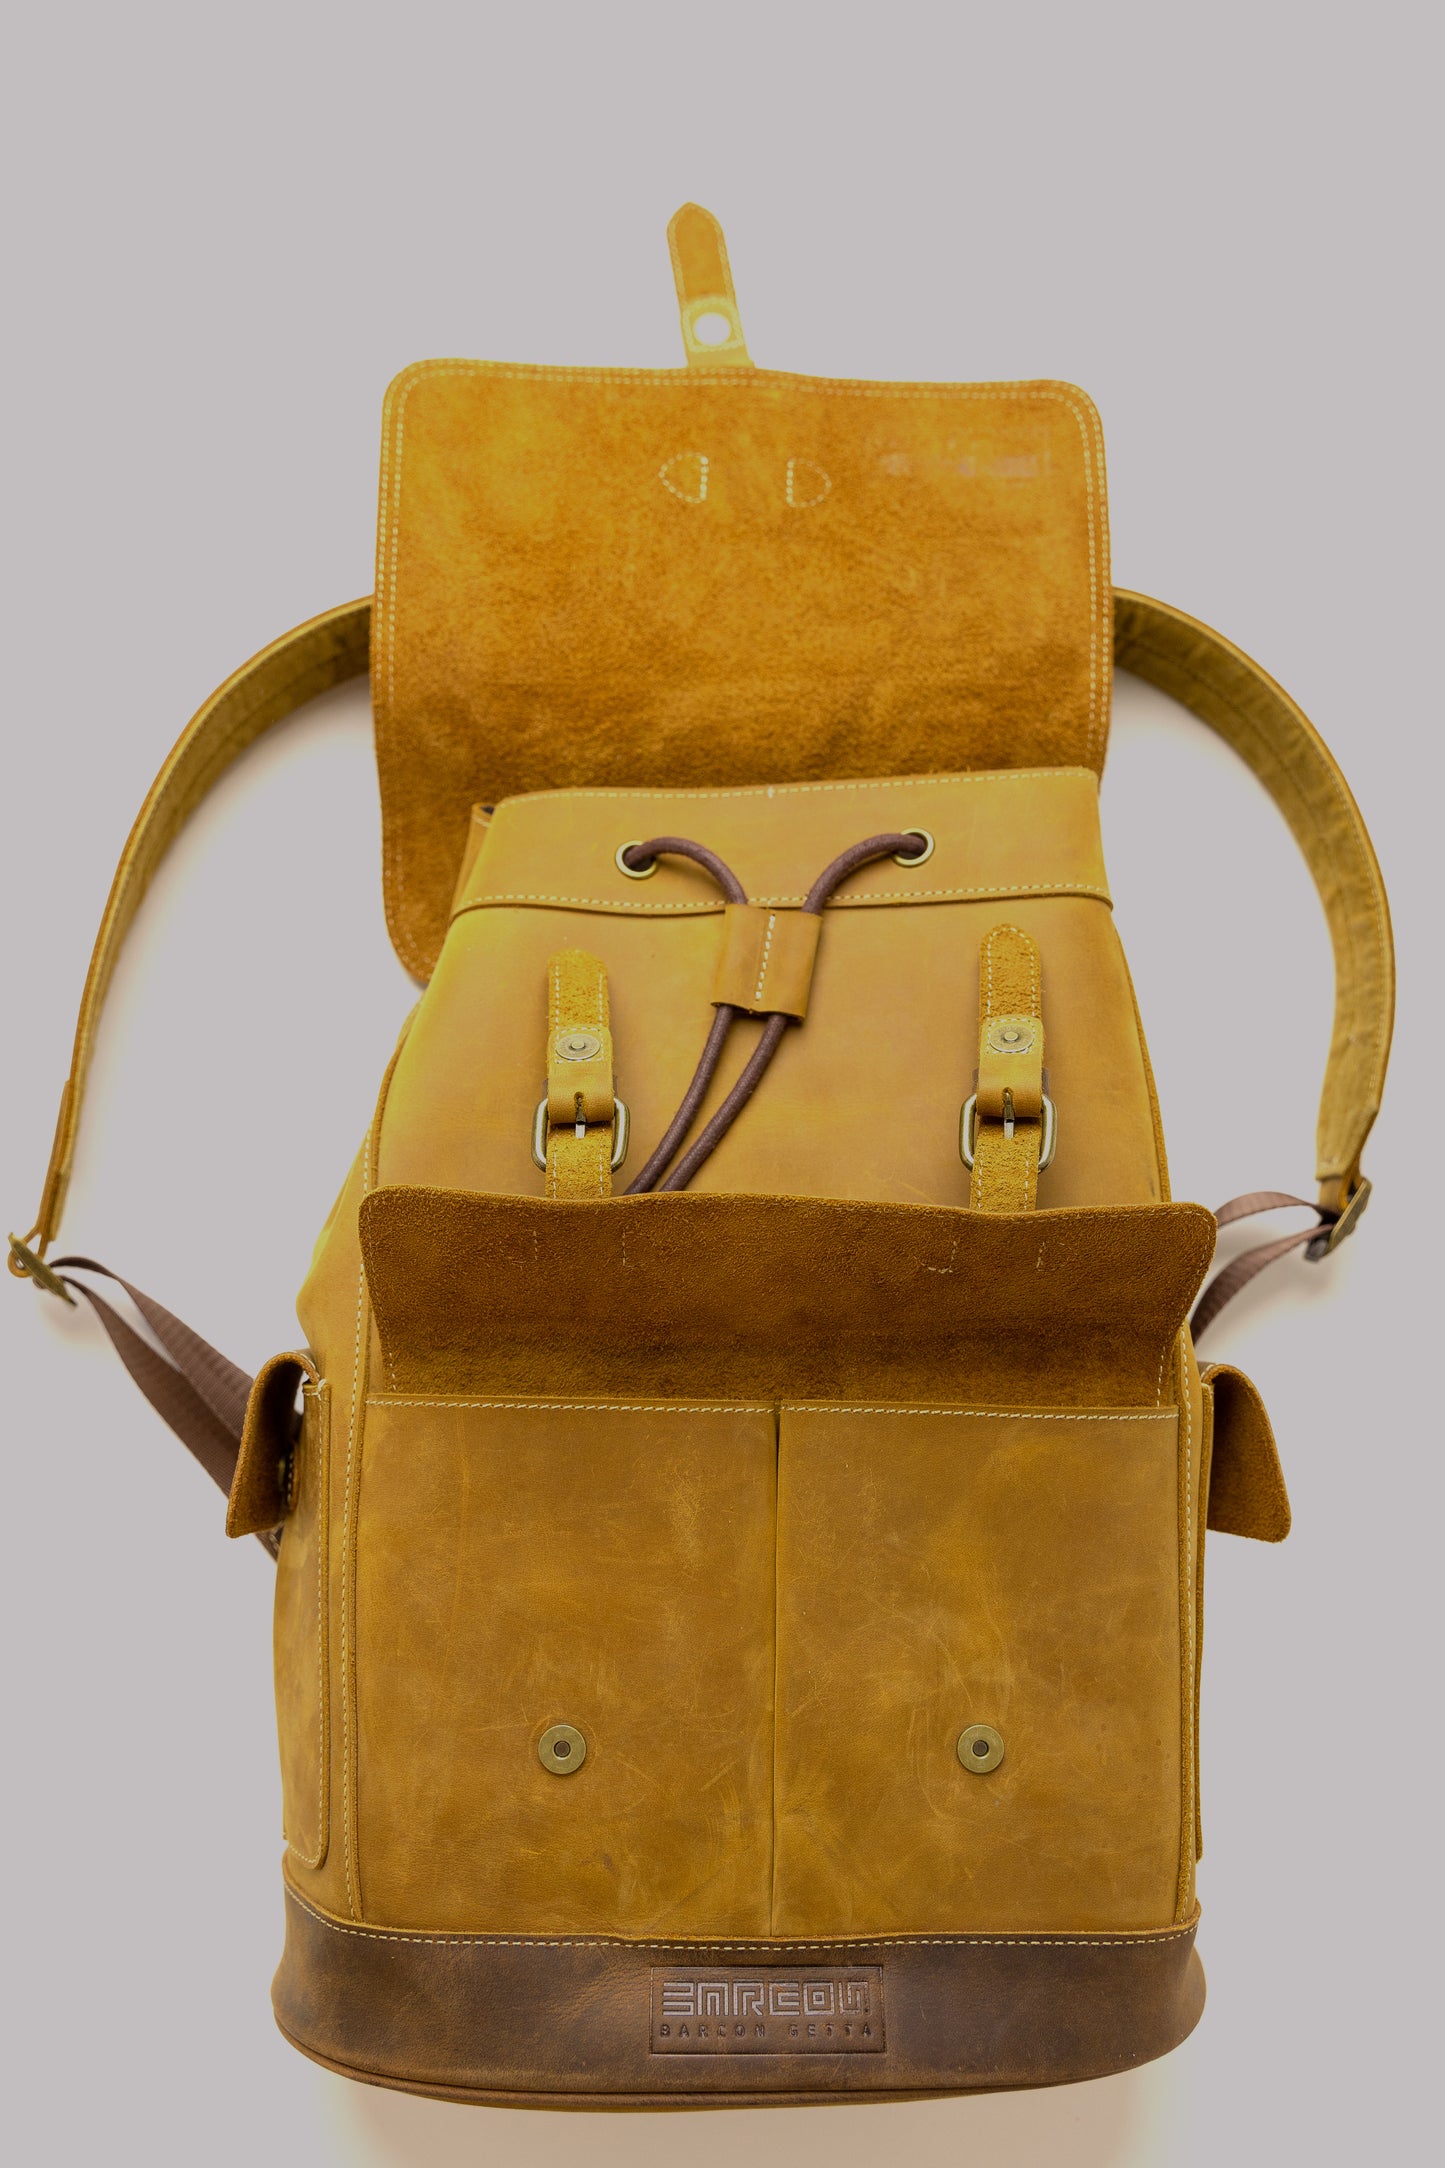 Ankelba Leather Backpack - A fashionable and functional backpack created in Ottawa, Canada, using top-notch leather. This backpack is the ideal fusion of fashion and utility for the contemporary traveler, with a roomy main area and numerous pockets.